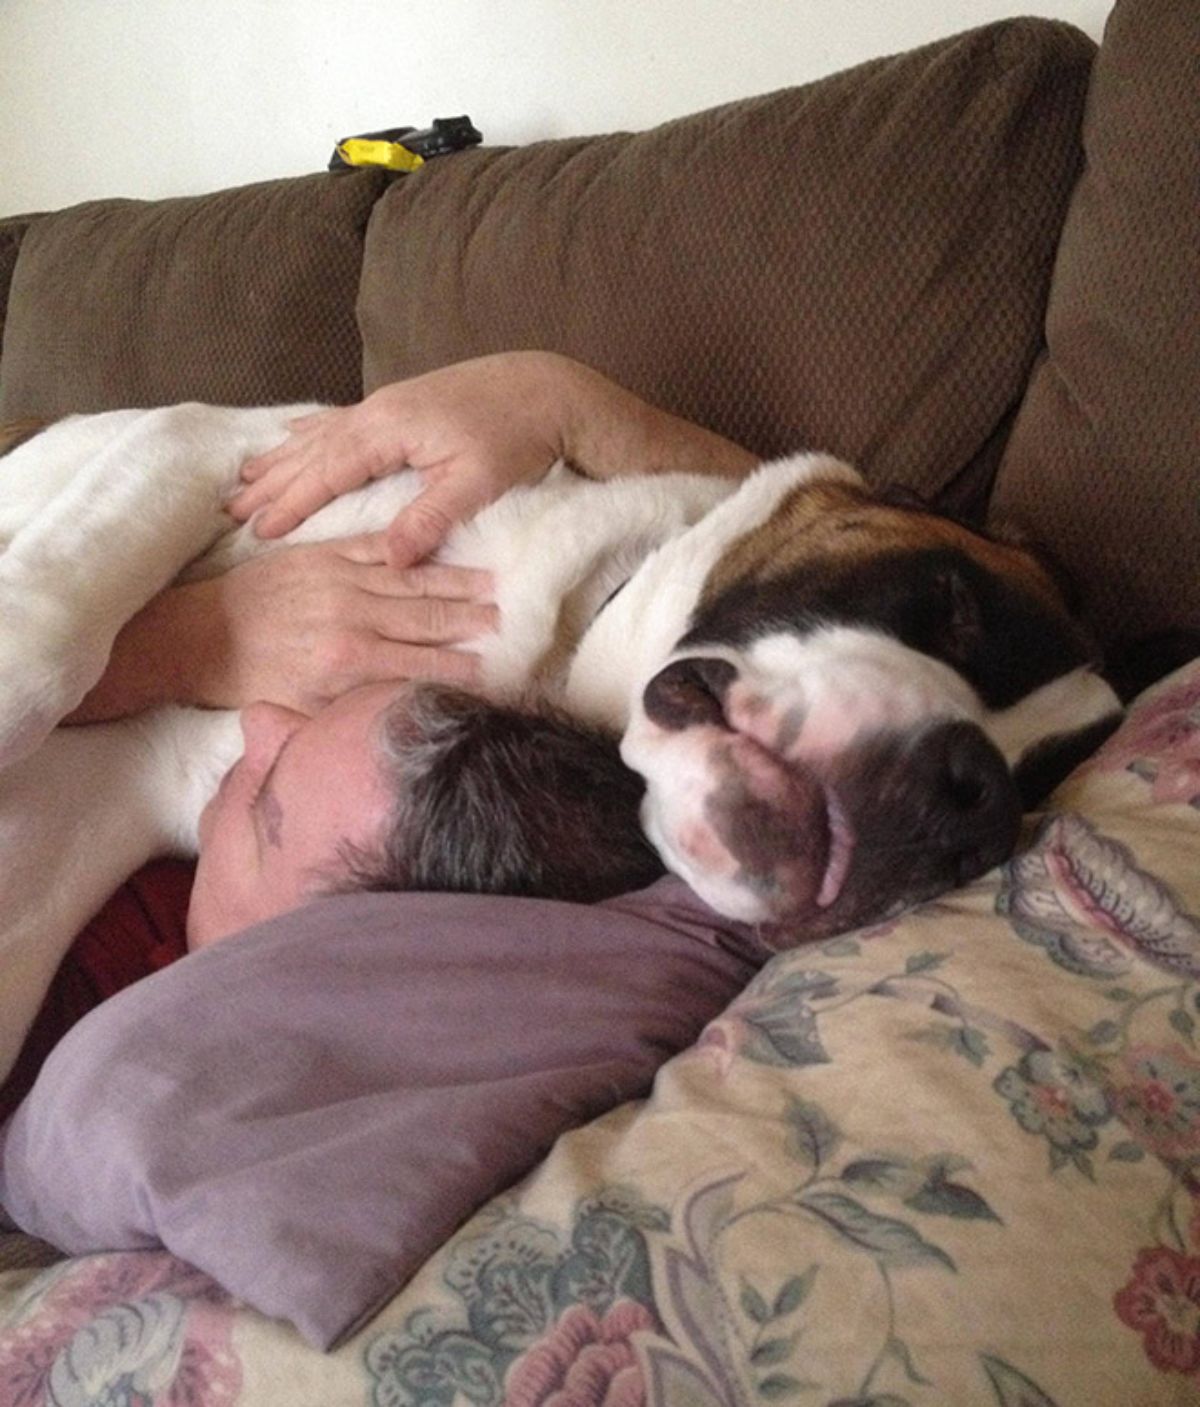 large white brown and black dog sleeping on a man sleeping on a brown sofa